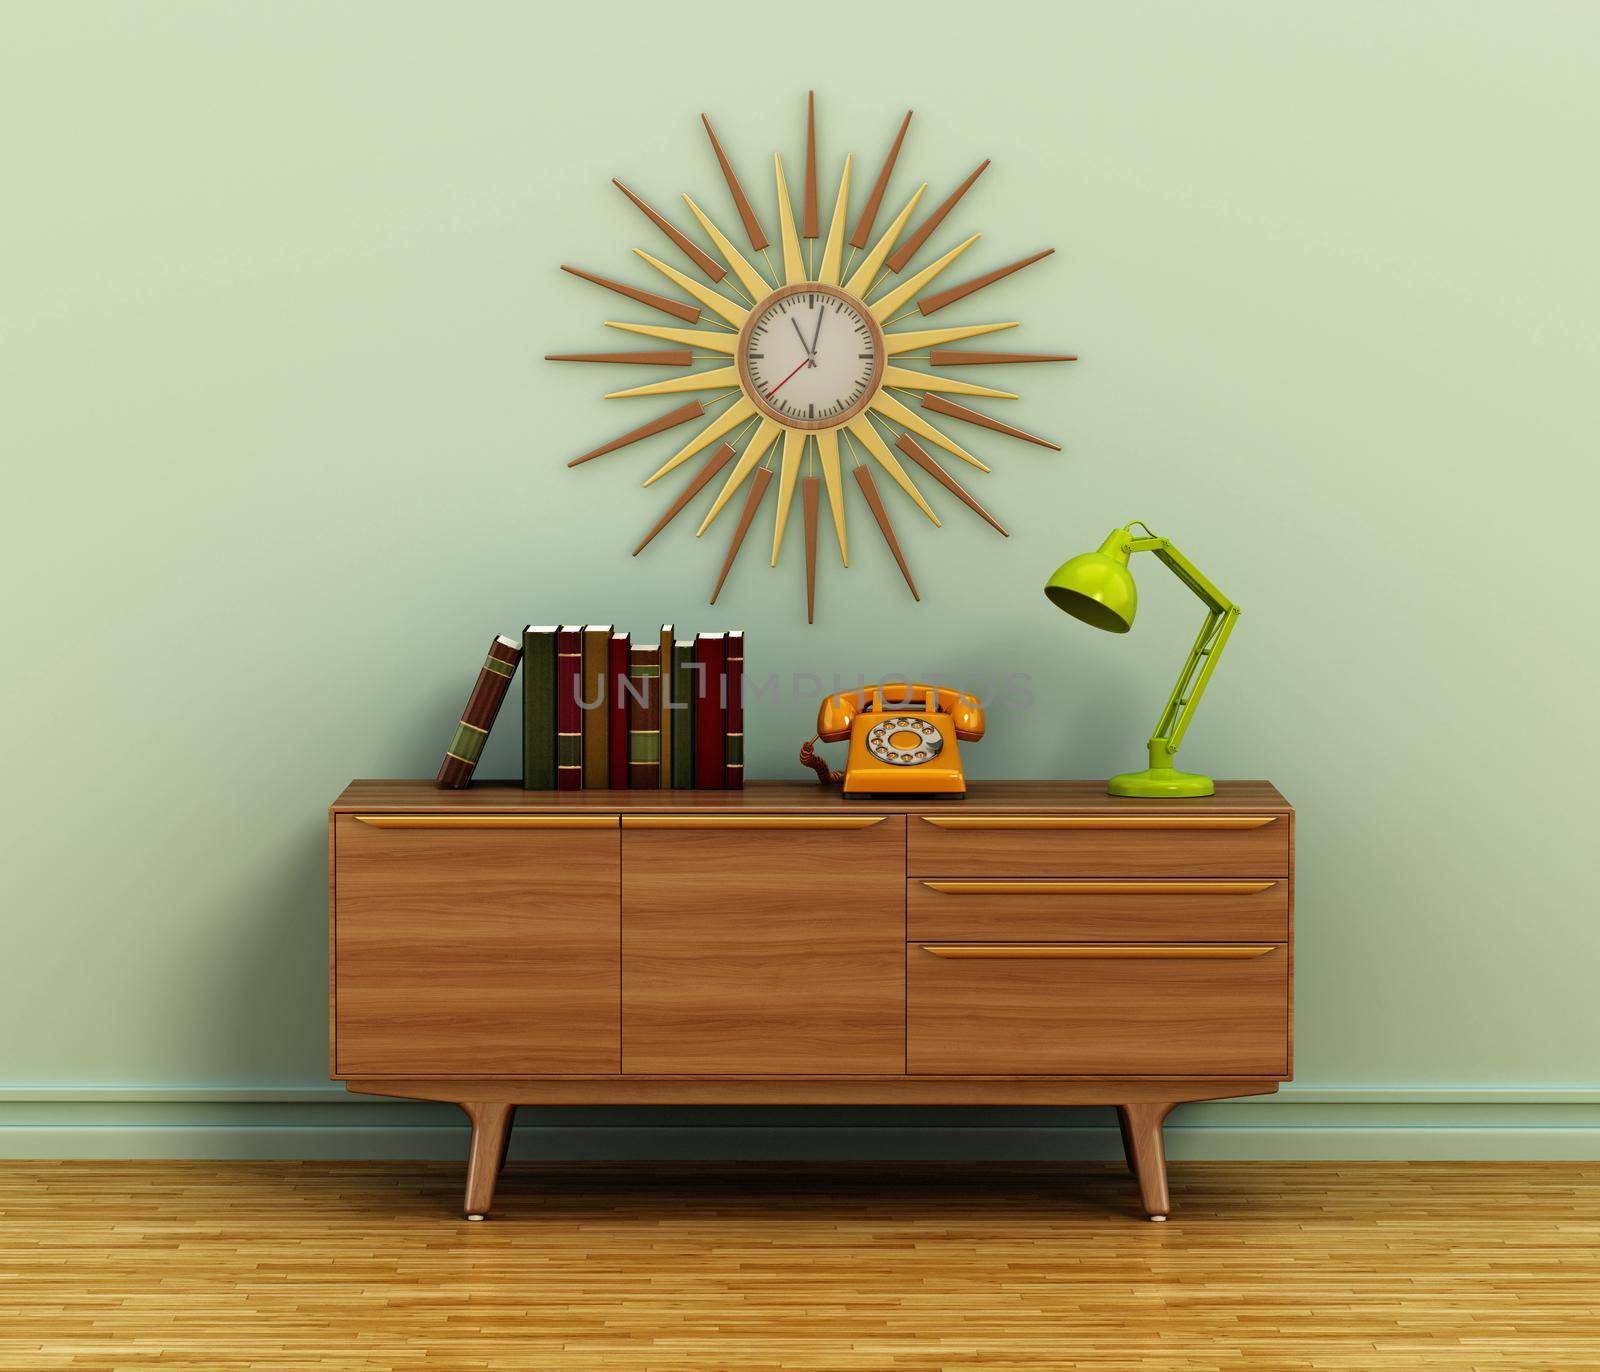 Dial phone, books and desk lamp on vintage style buffet table. 3D illustration by Simsek